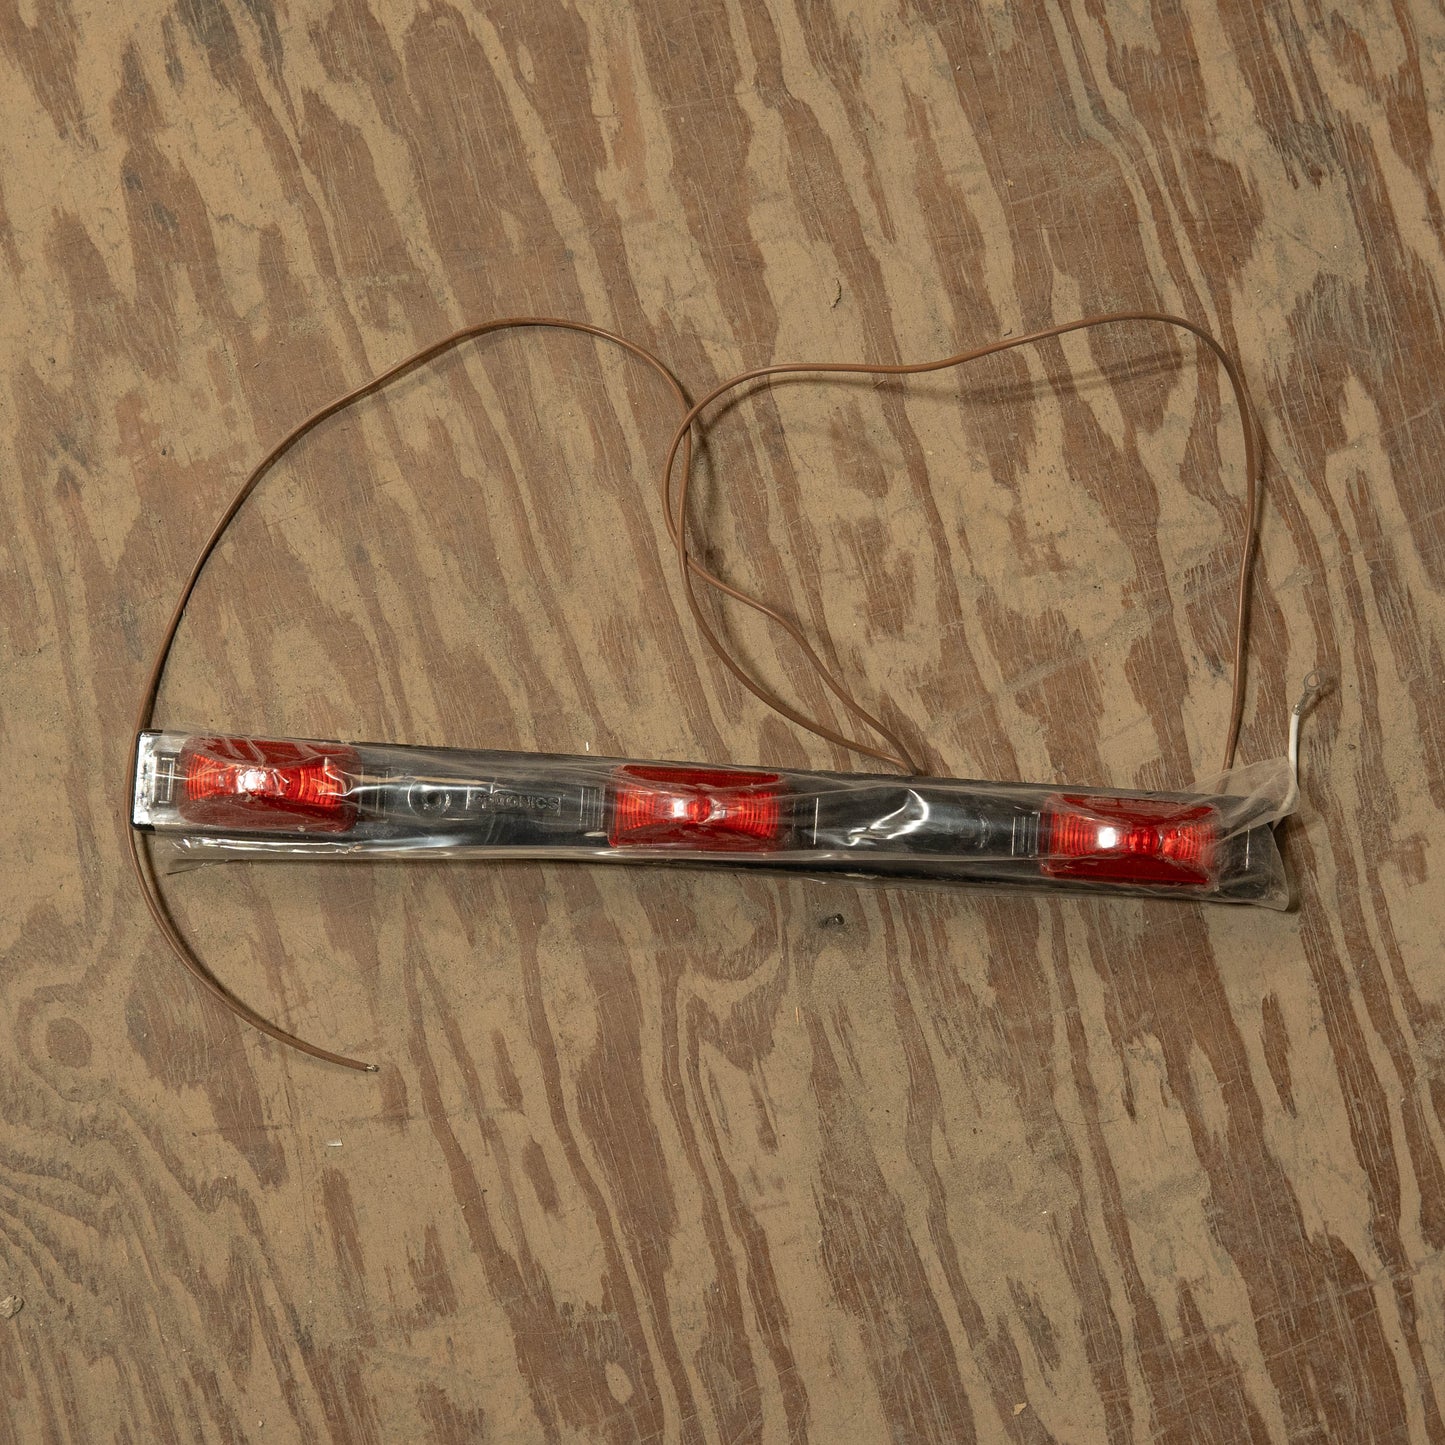 Sealed ID Light Bar - 3 Red Lights- Items Sold As Is